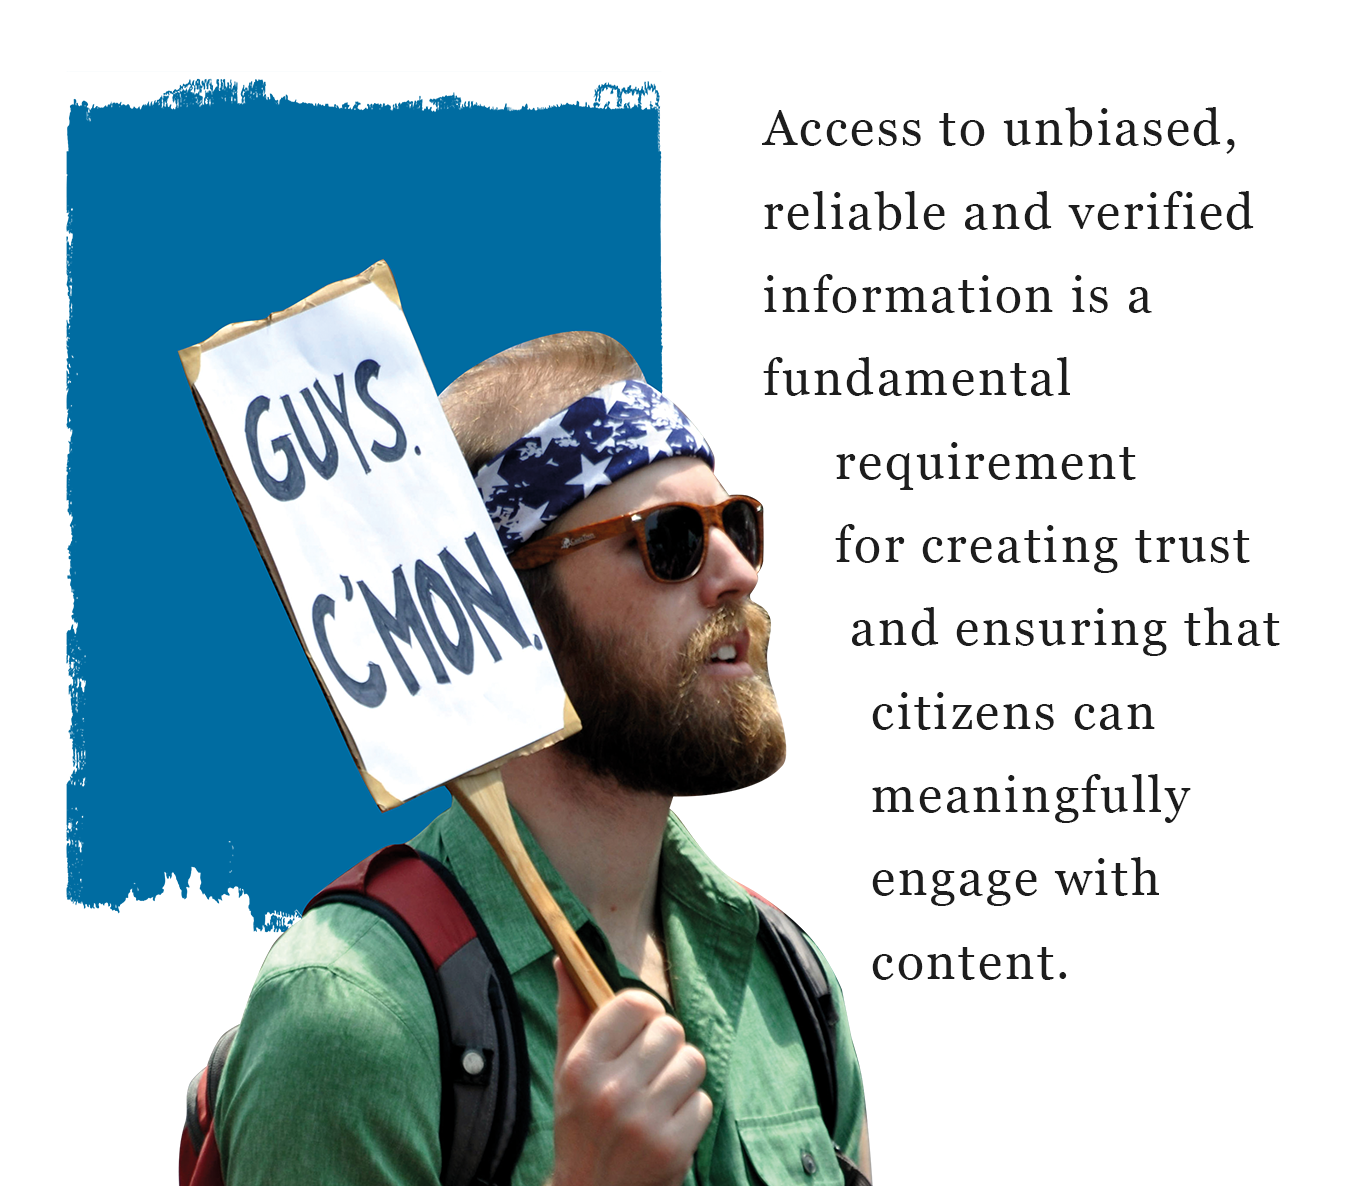 Photo of a man with a placard reading 'Guys. C'mon.' on a blue background with a quote from the Wikimedia + Democracy report.